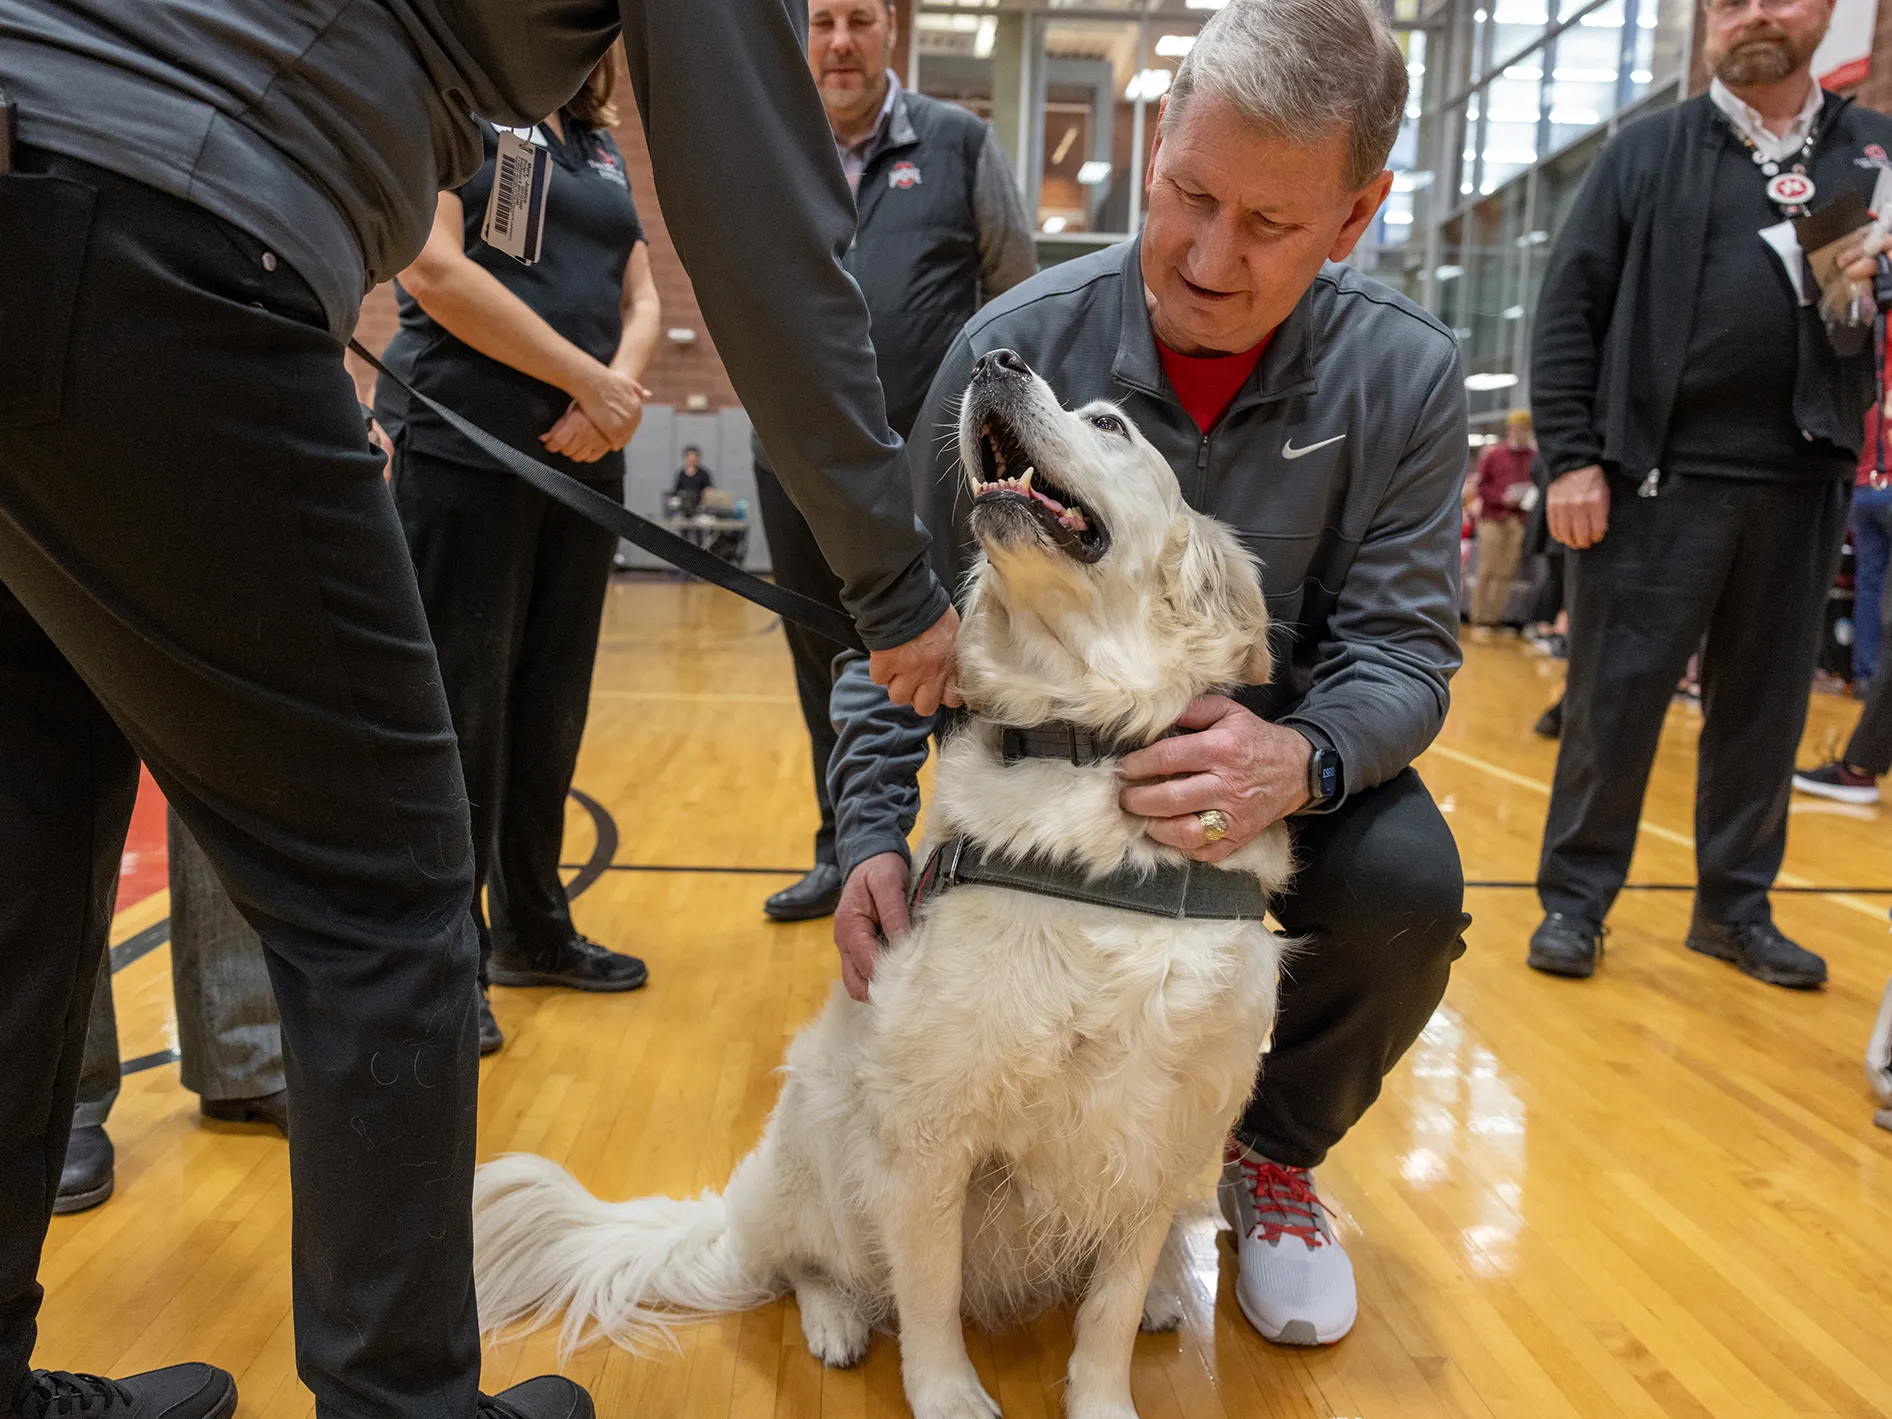 President Carter crouches on a gymnasium floor and used both hands to pet a golden retriever who is smiling up at her owner, who’s mostly off camera. The owner helped found Buckeye Paws, the group of volunteer dog owners who take their pets around campus to spread cheer. In the background, more people stand around President Carter and the dog. 